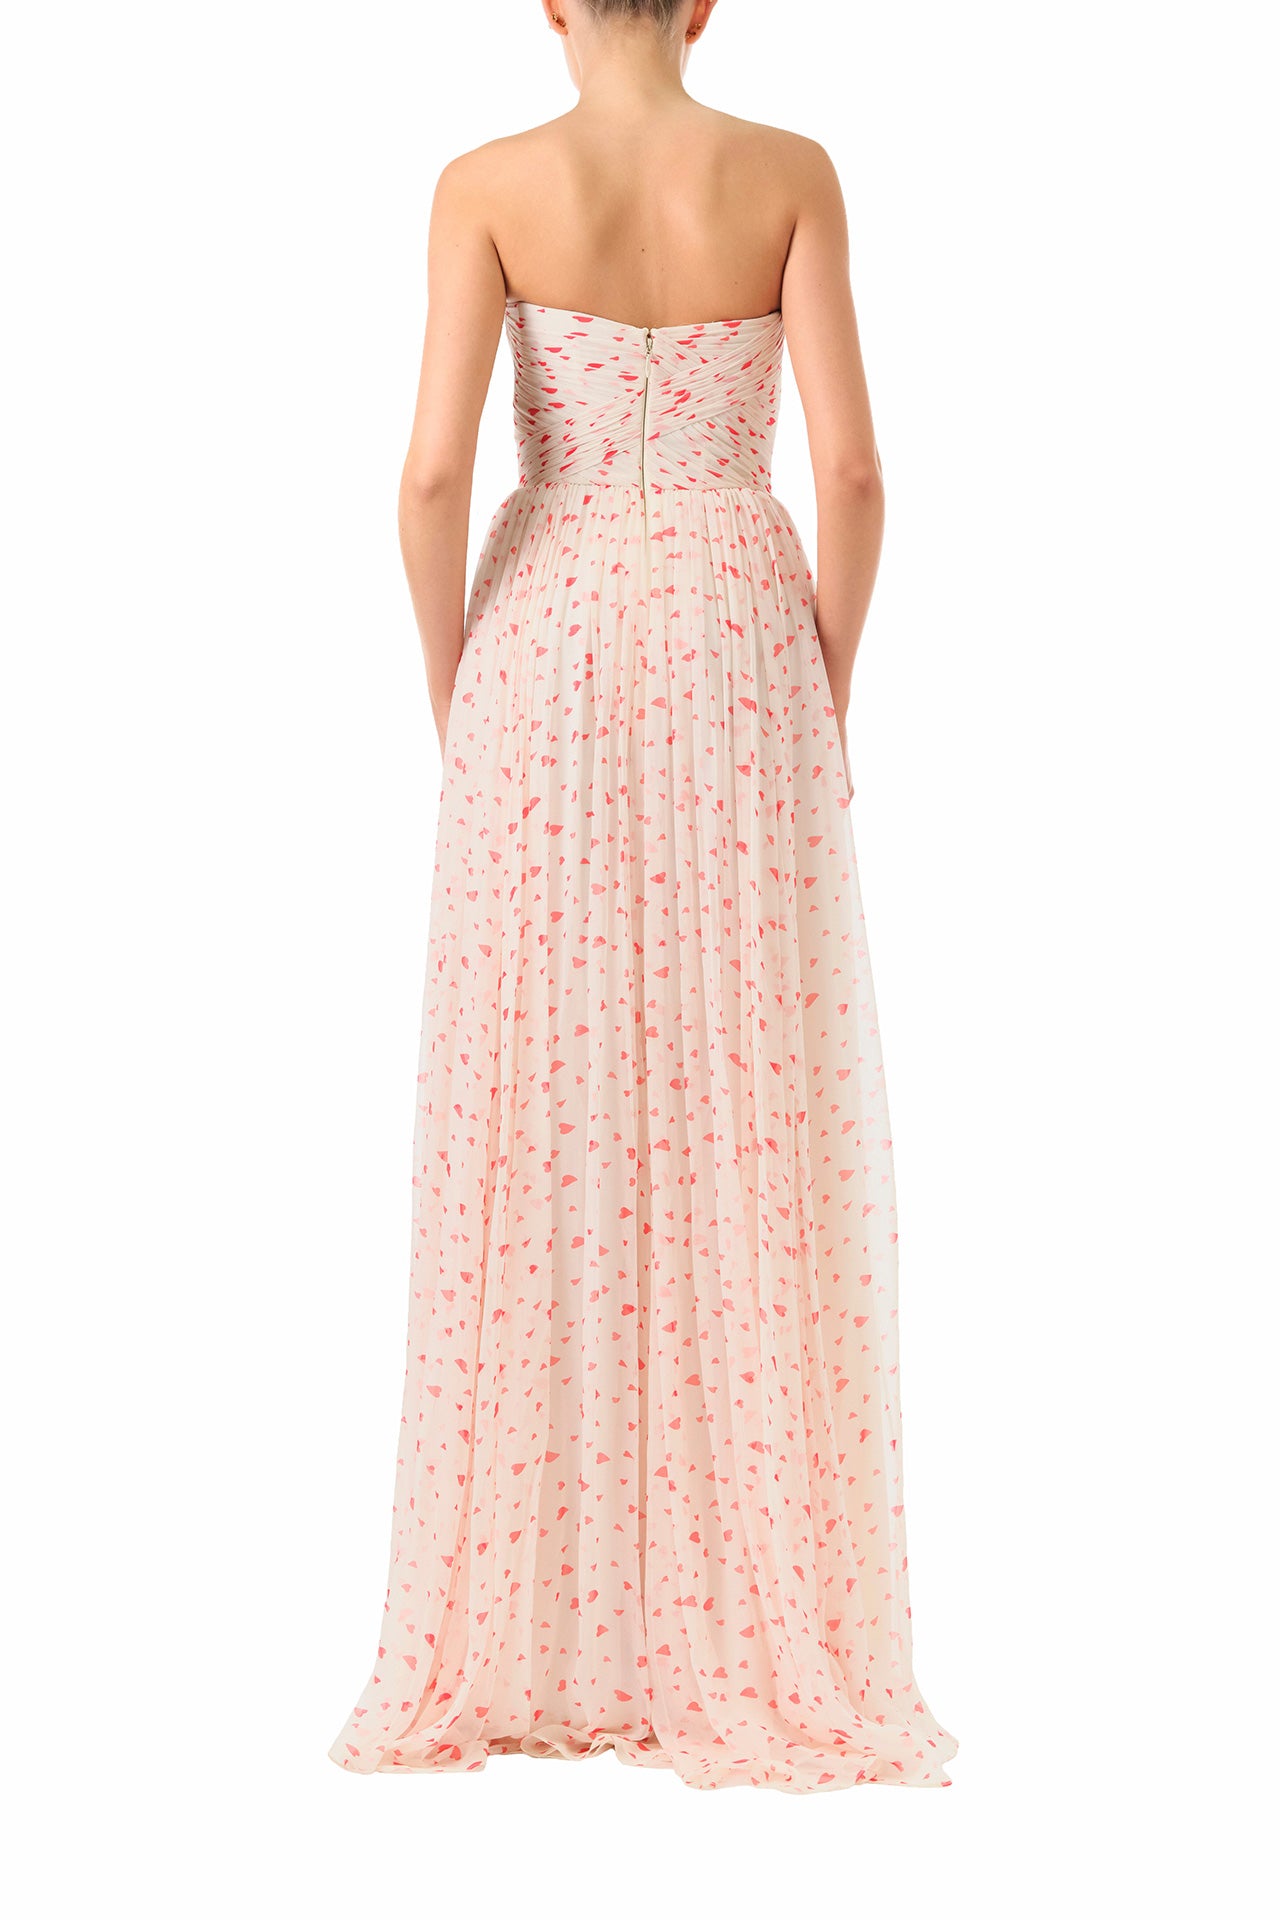 Monique Lhuillier Fall 2024 strapless chiffon gown with gathered sweetheart bodice in heart printed chiffon fabric - back.